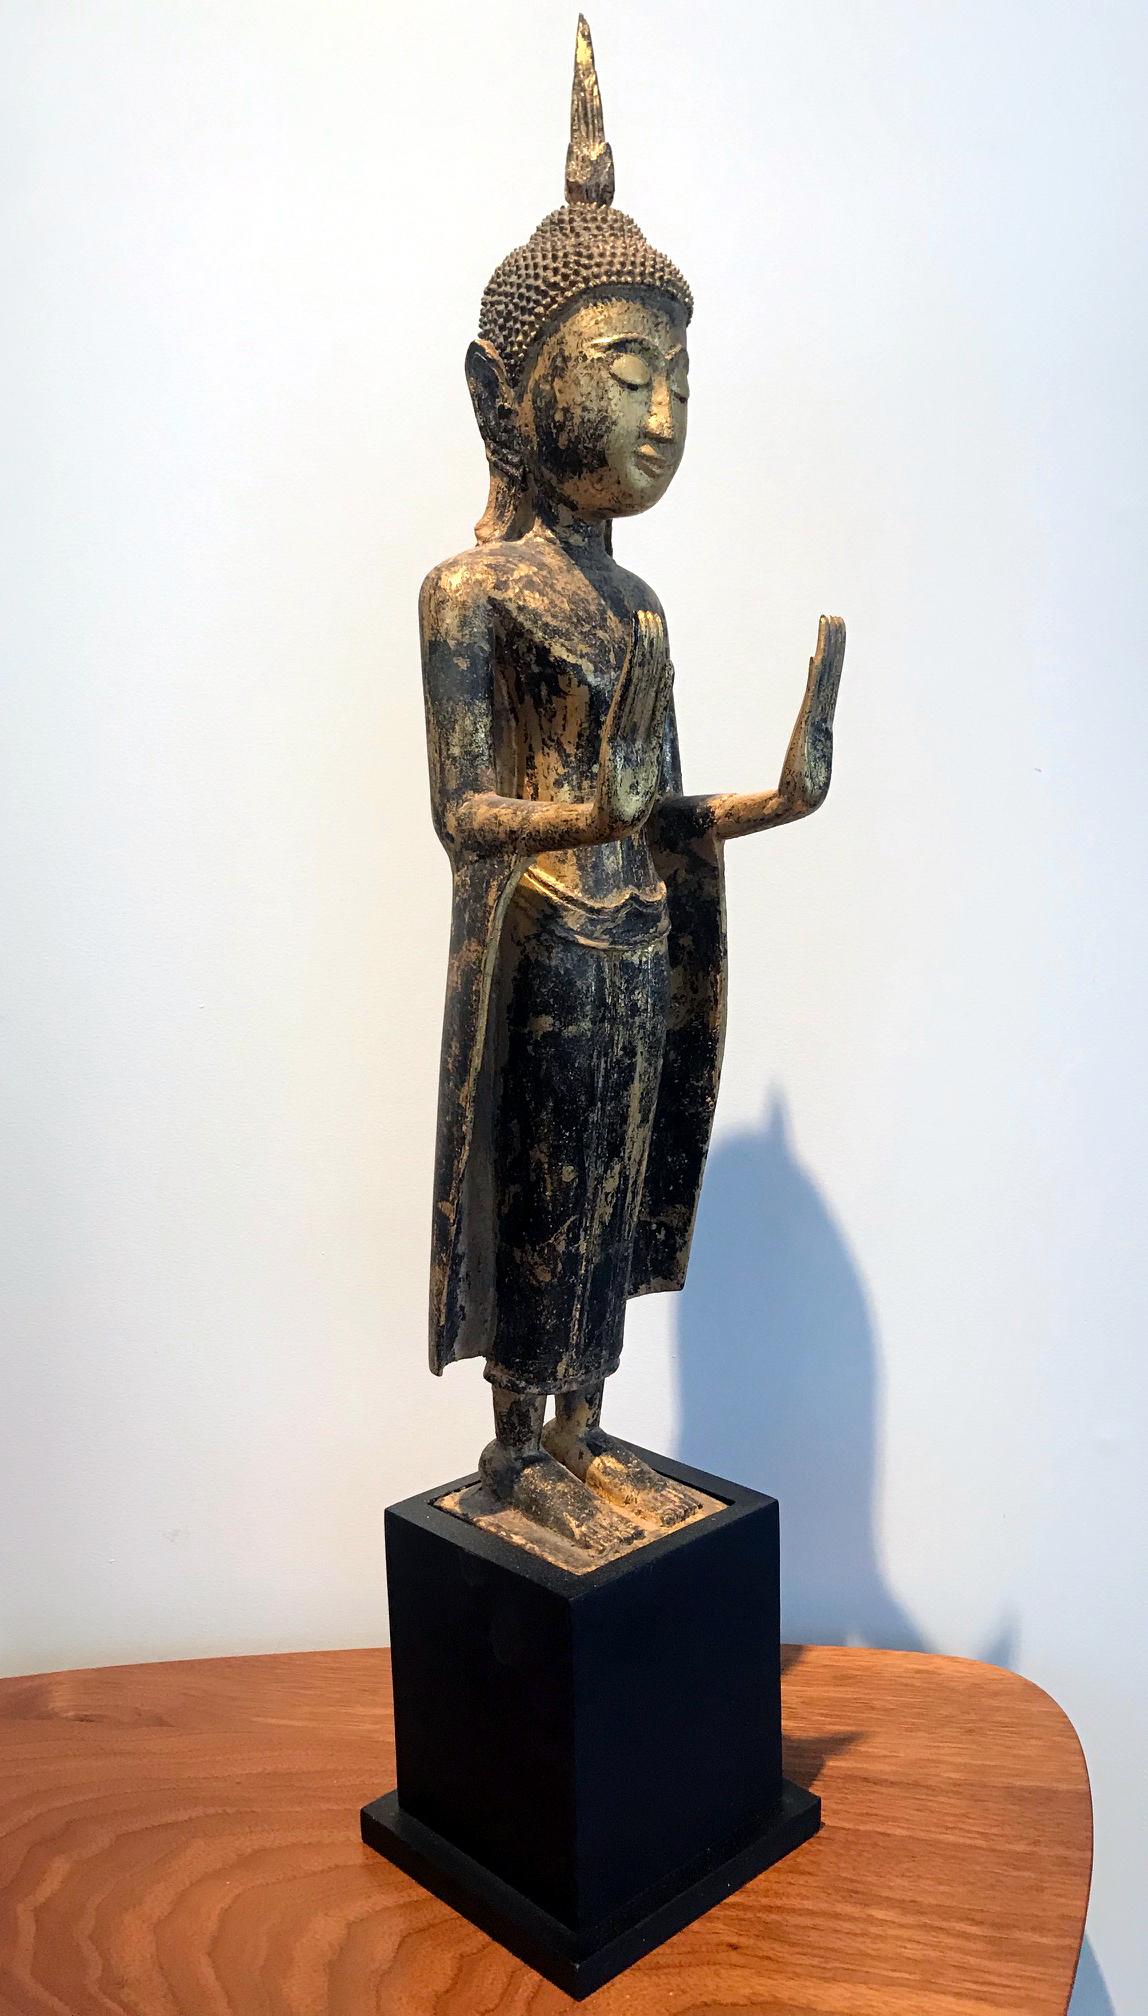 A delicately carved wood Buddha in an upright standing posture with a double Abhaya mudra. The statue displays a gilt surface with beautiful patina and some minor wear. The face was rendered with a serene expression with downcast eyes and a faint